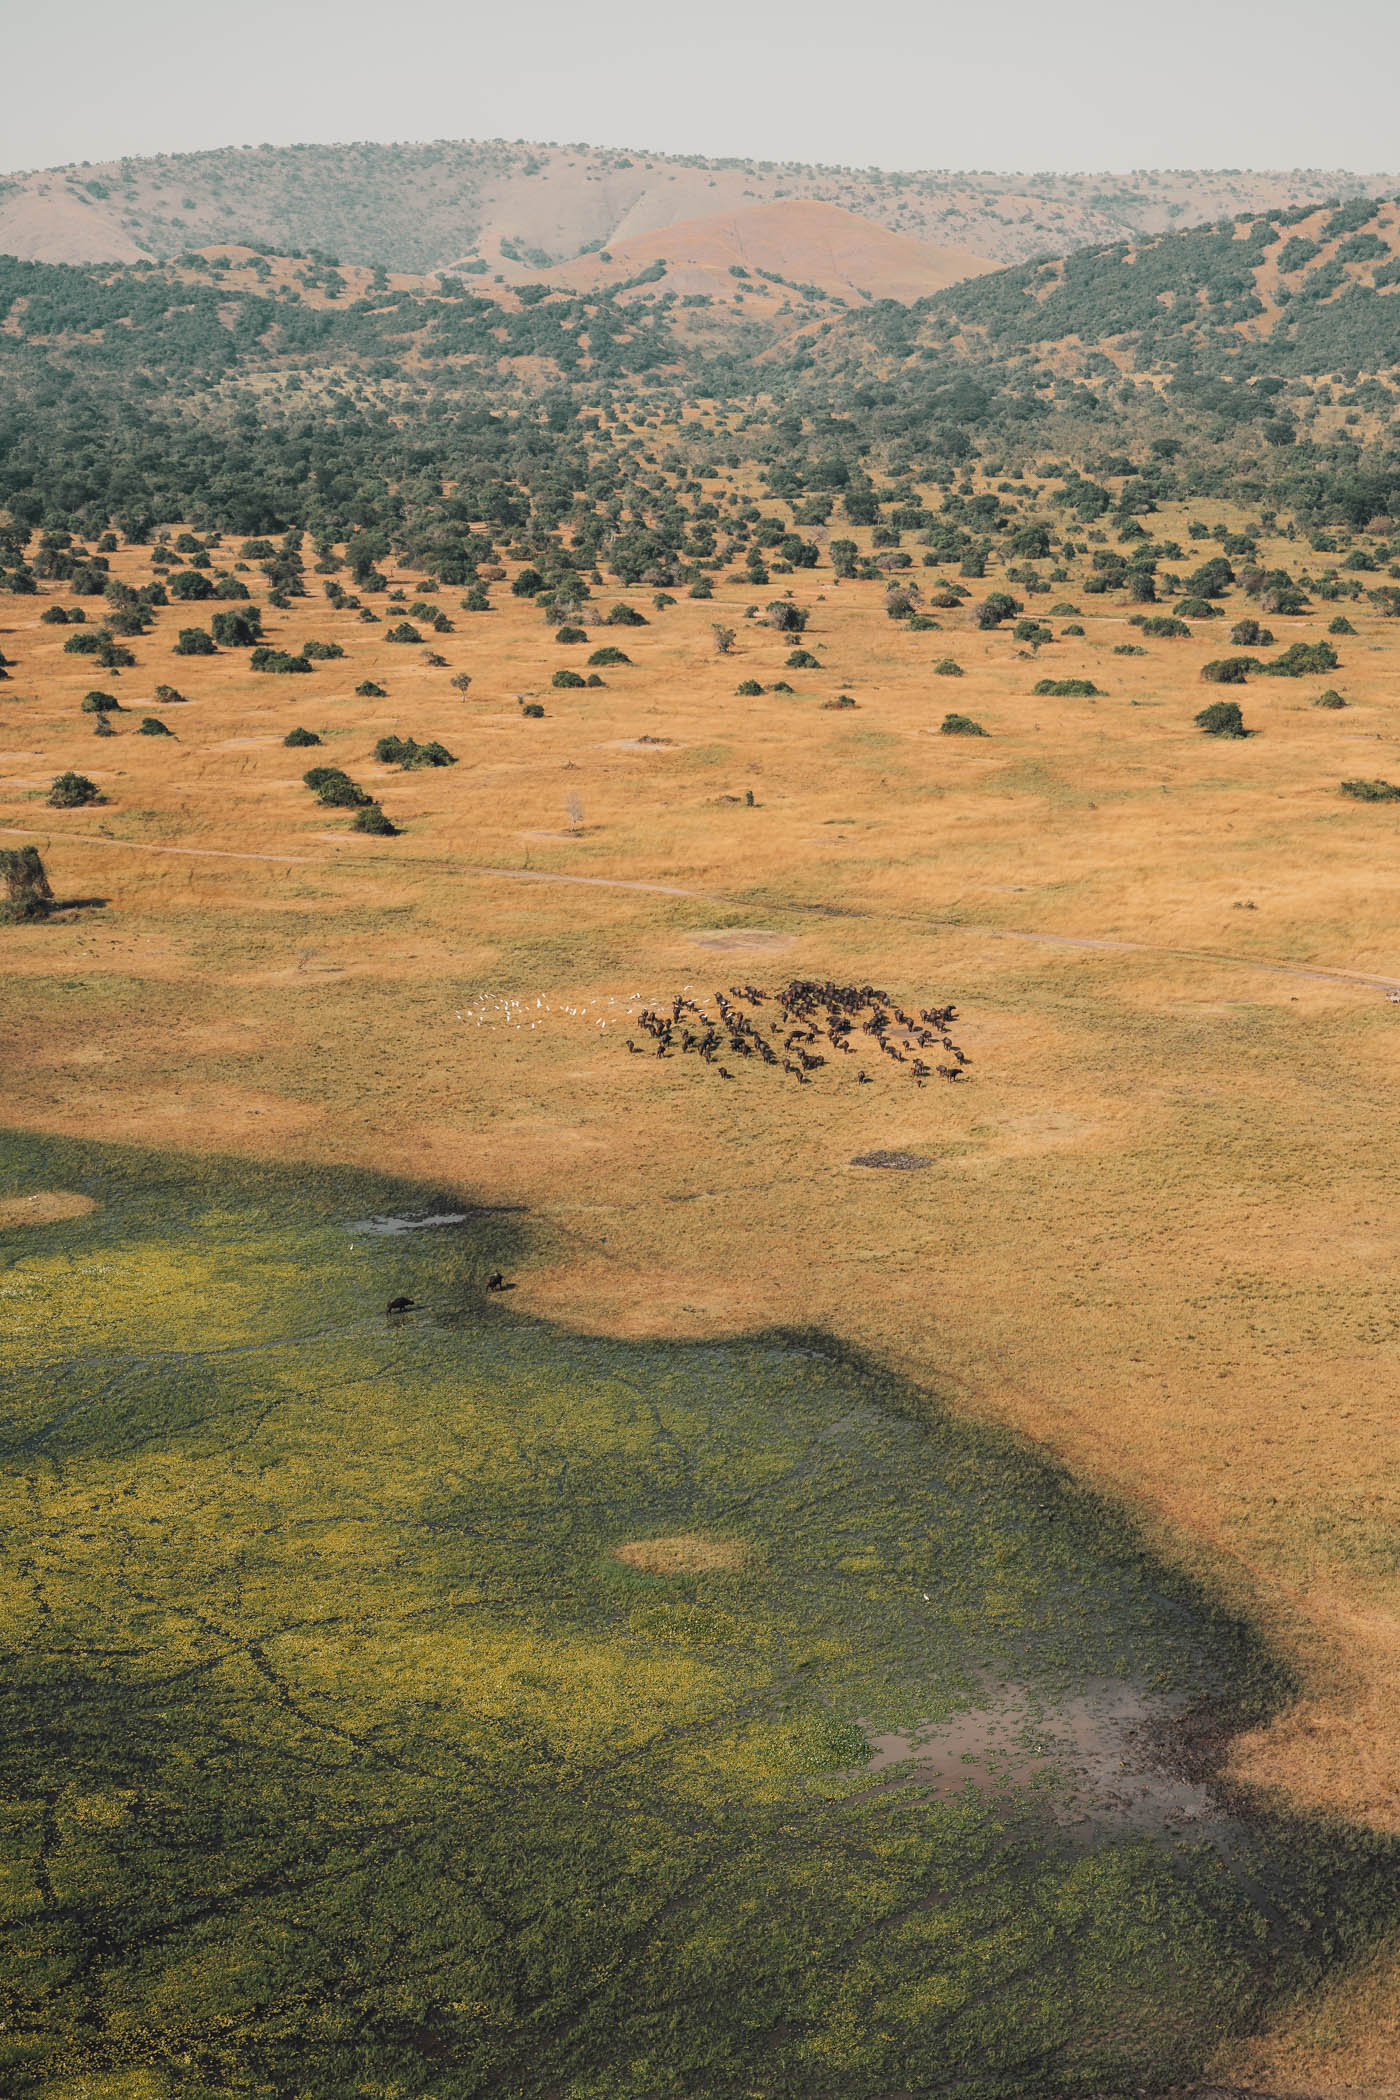 A herd of buffalos as seen from a helicopter in Akagera National Park in Rwanda